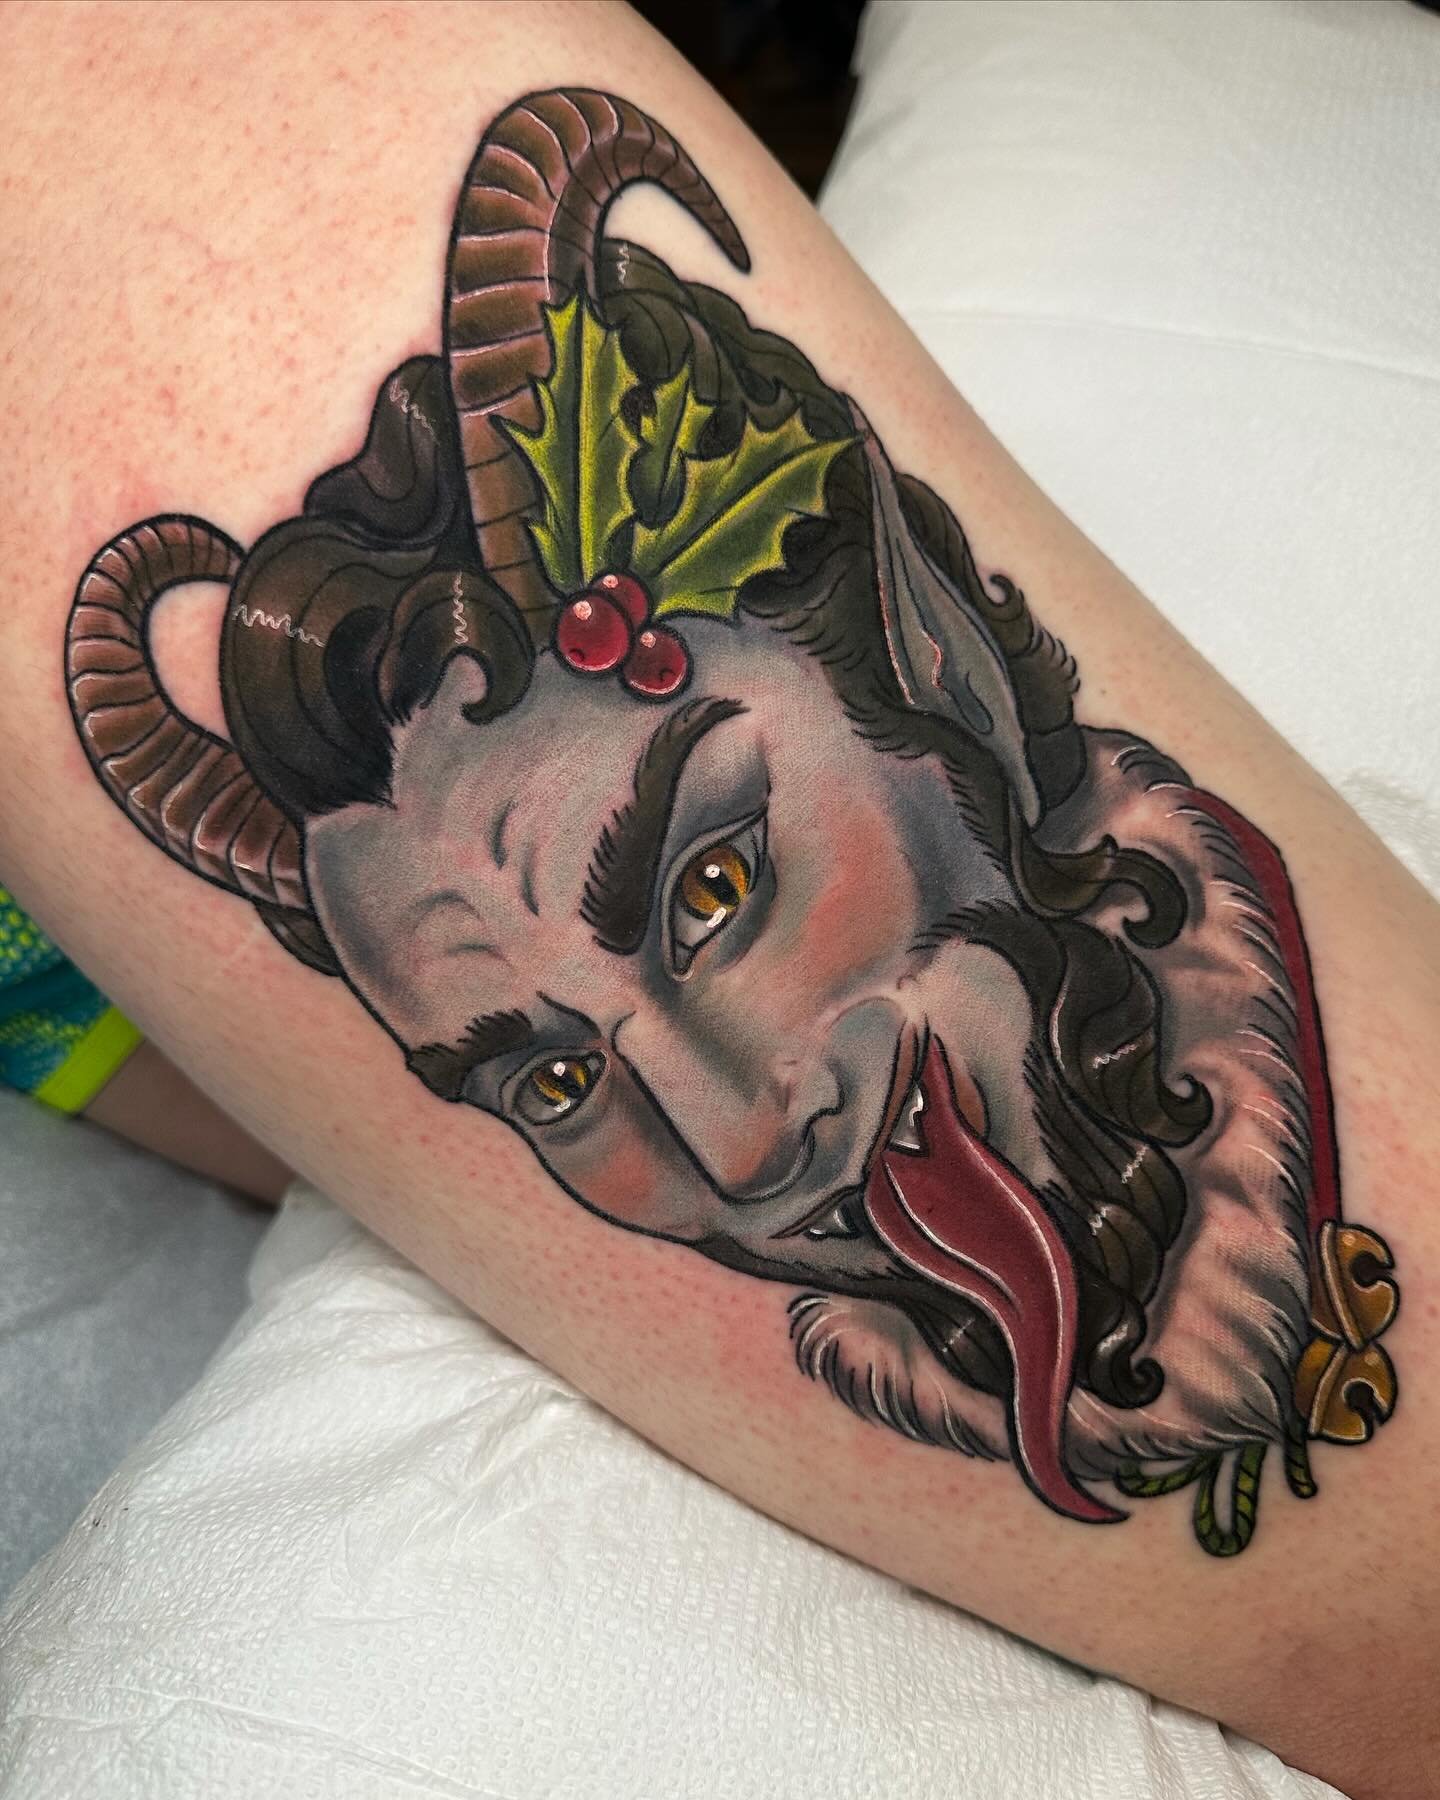 My pre-drawn Krampus! Lines healed, color fresh. I love how this came out. Thanks so much, Lisa!
.
My books are open for custom designs! Booking form is pinned to my profile. 
.
.
.
.
.
#krampus #krampustattoo #christmastattoo #yule #oregon #pnw #ore